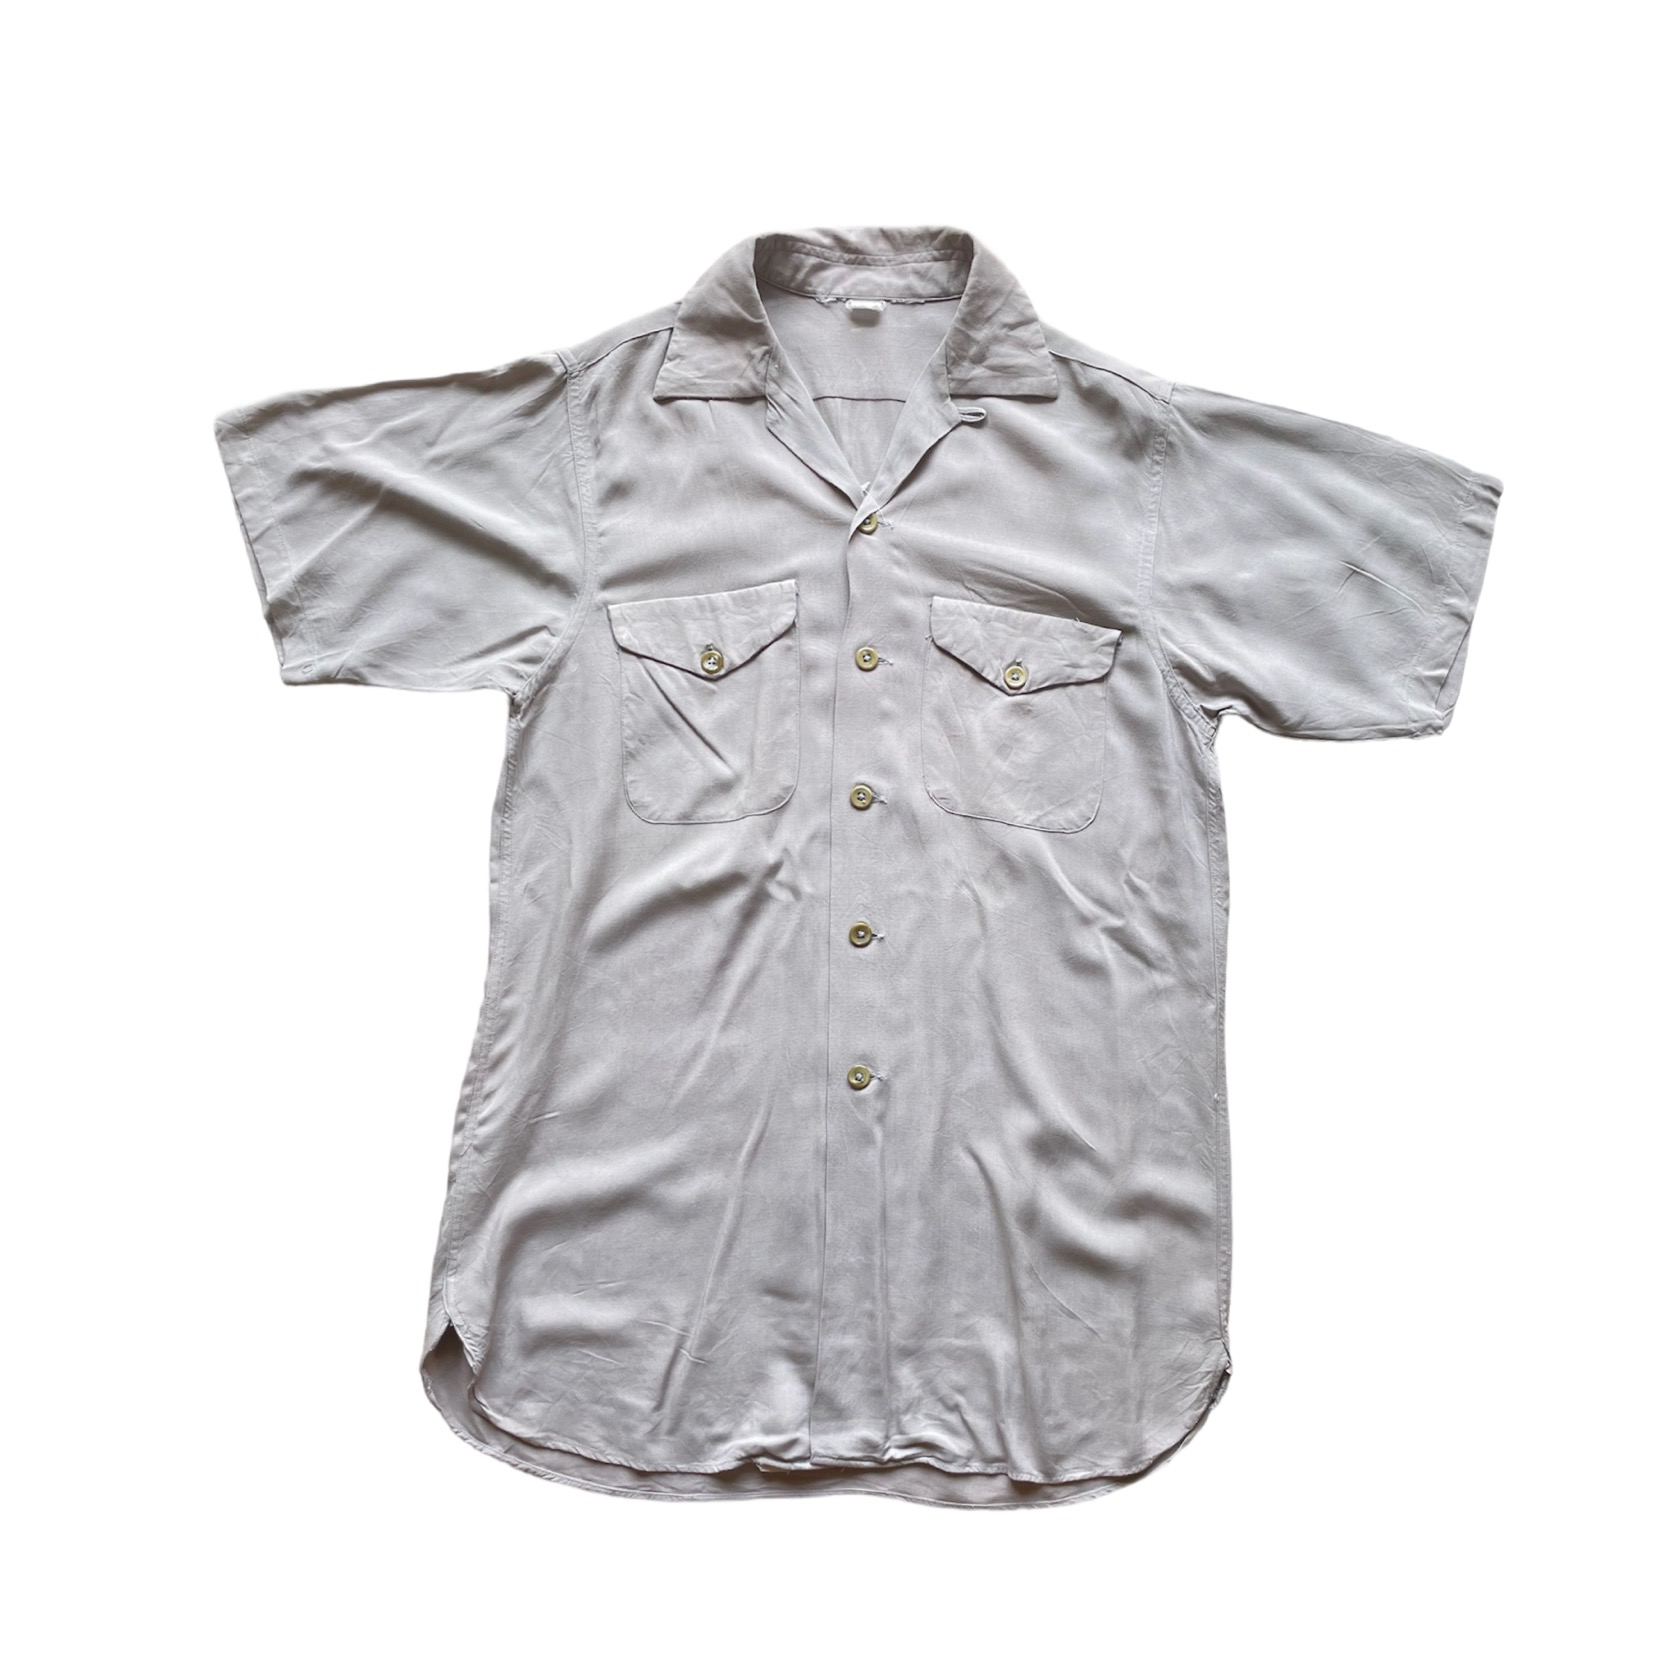 50〜60's Vintage S/S shirt マチ付き 古着 us古着 ヴィンテージシャツ